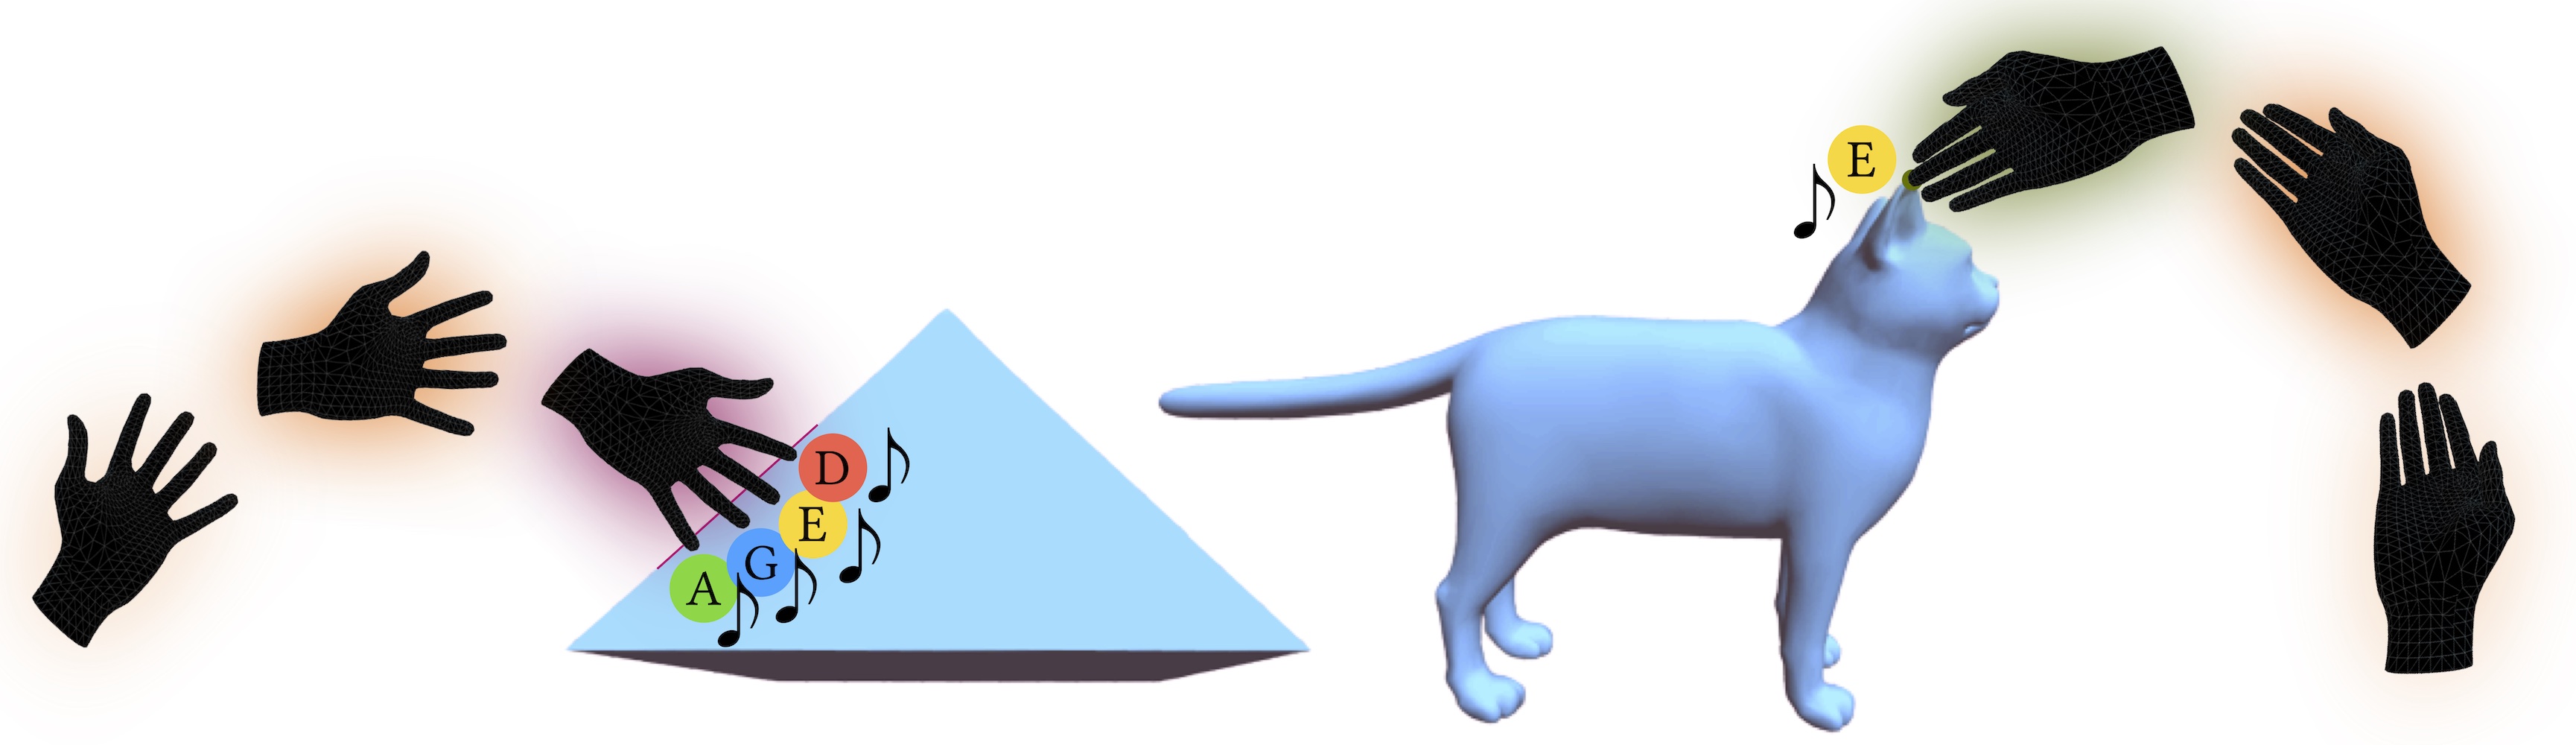 A hand moves from the left to touch a pyramid with four fingers. As the hand moves closer, it glows more strongly. Each fingertip in contact with the pyramid has a musical note labeled with the letters A, G, E, and D, respectively. A hand also moves from the right to touch a cat's ear. As the hand moves closer, it glows more strongly. The fingertip in contact has a musical note labeled with the letter E.